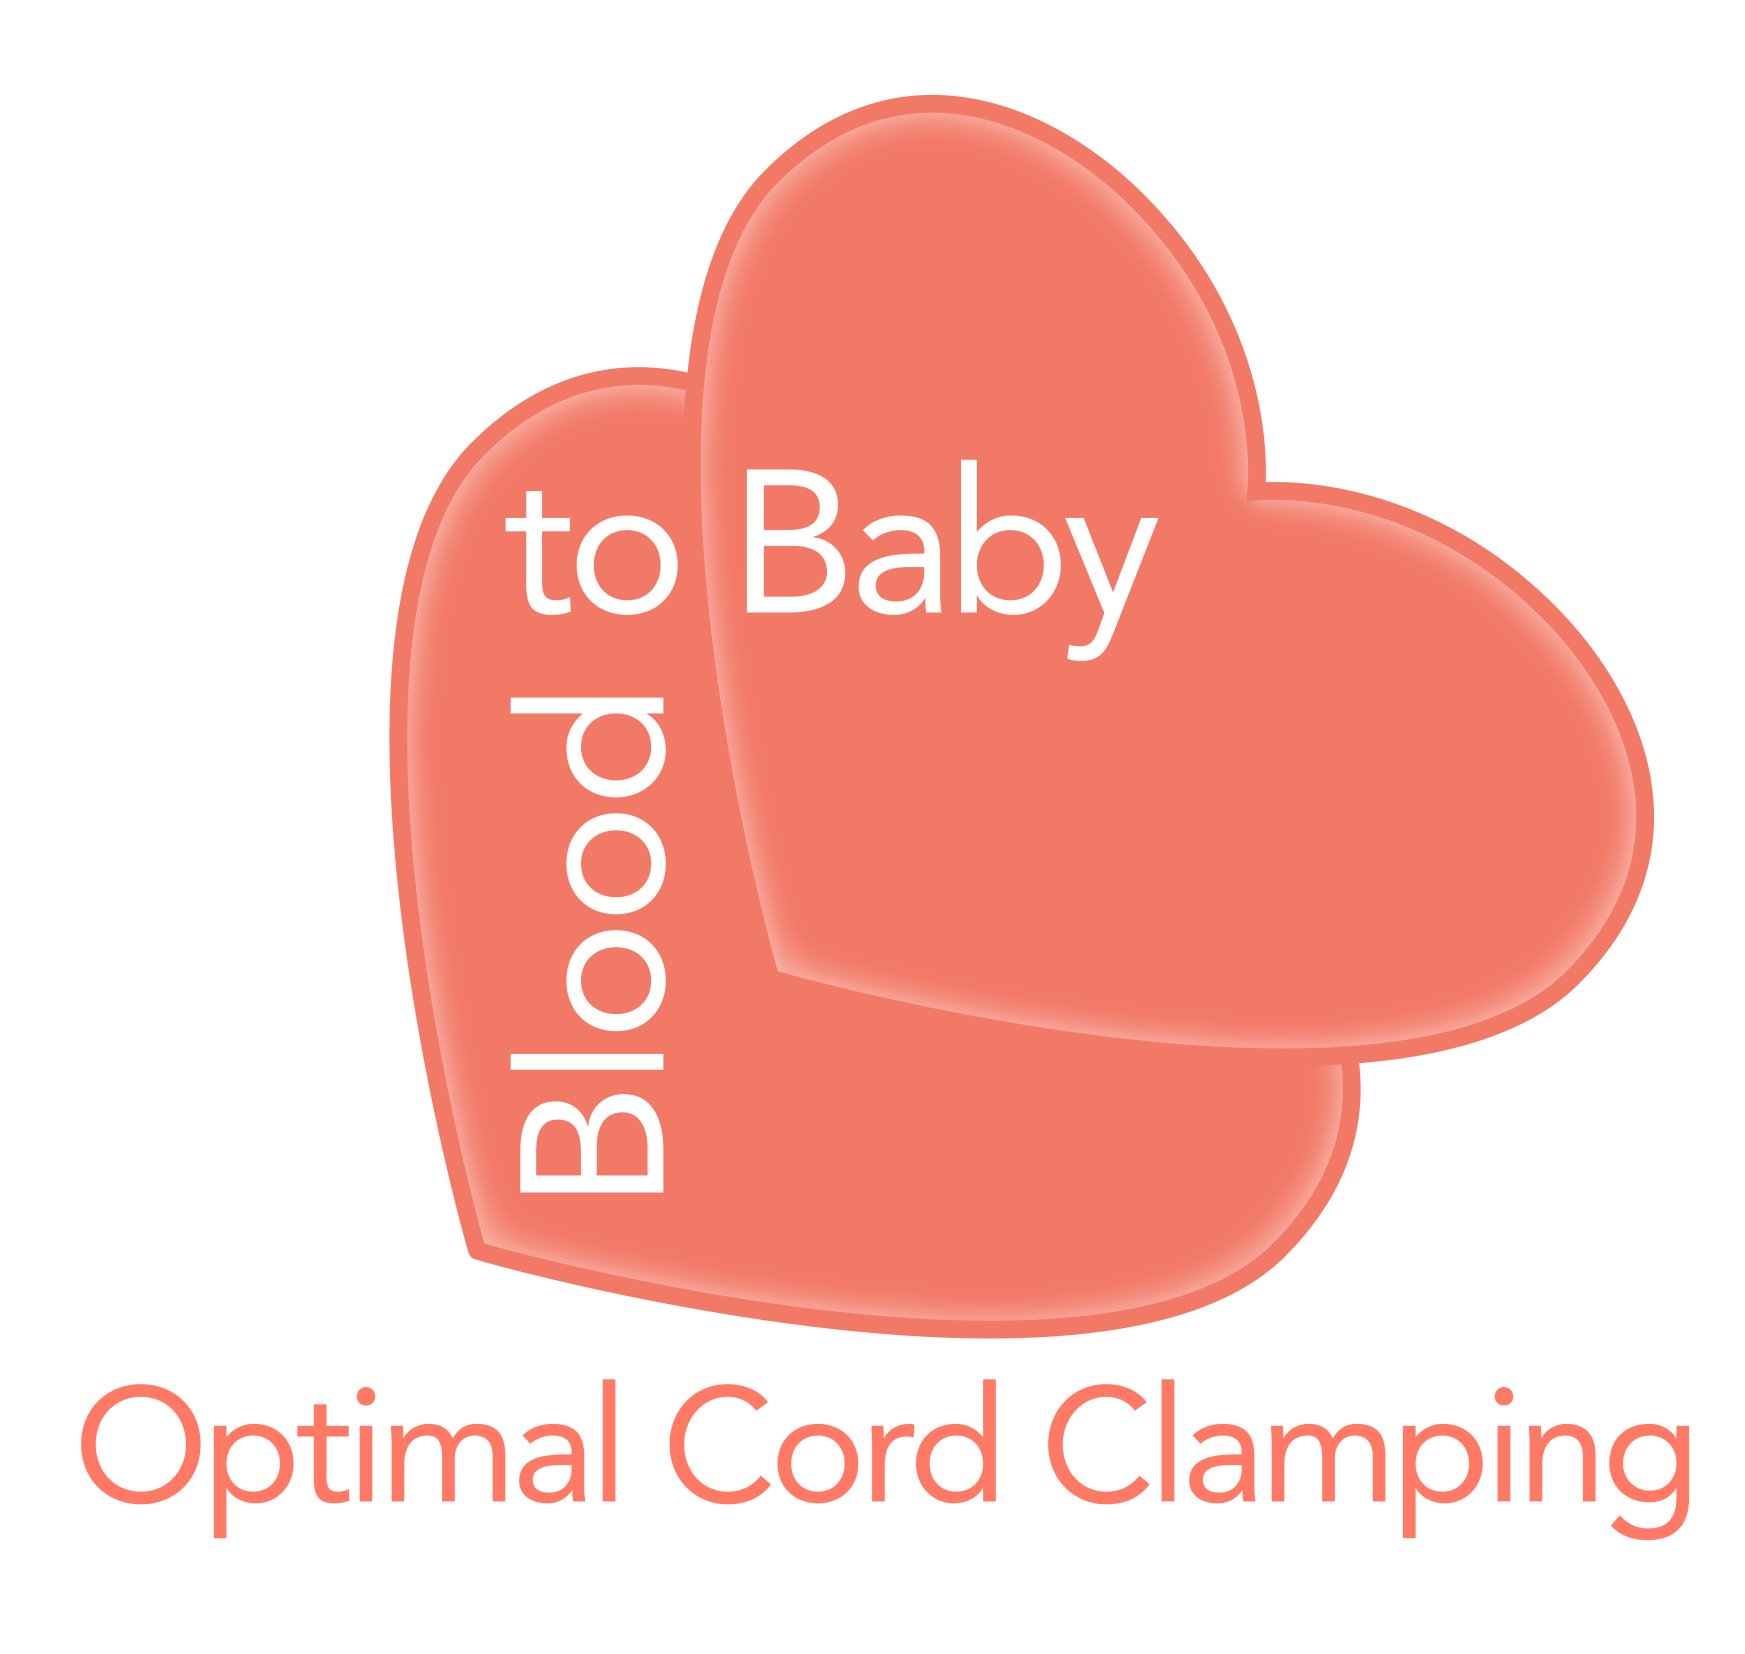 #BloodtoBaby - Optimal Cord Clamping featured image